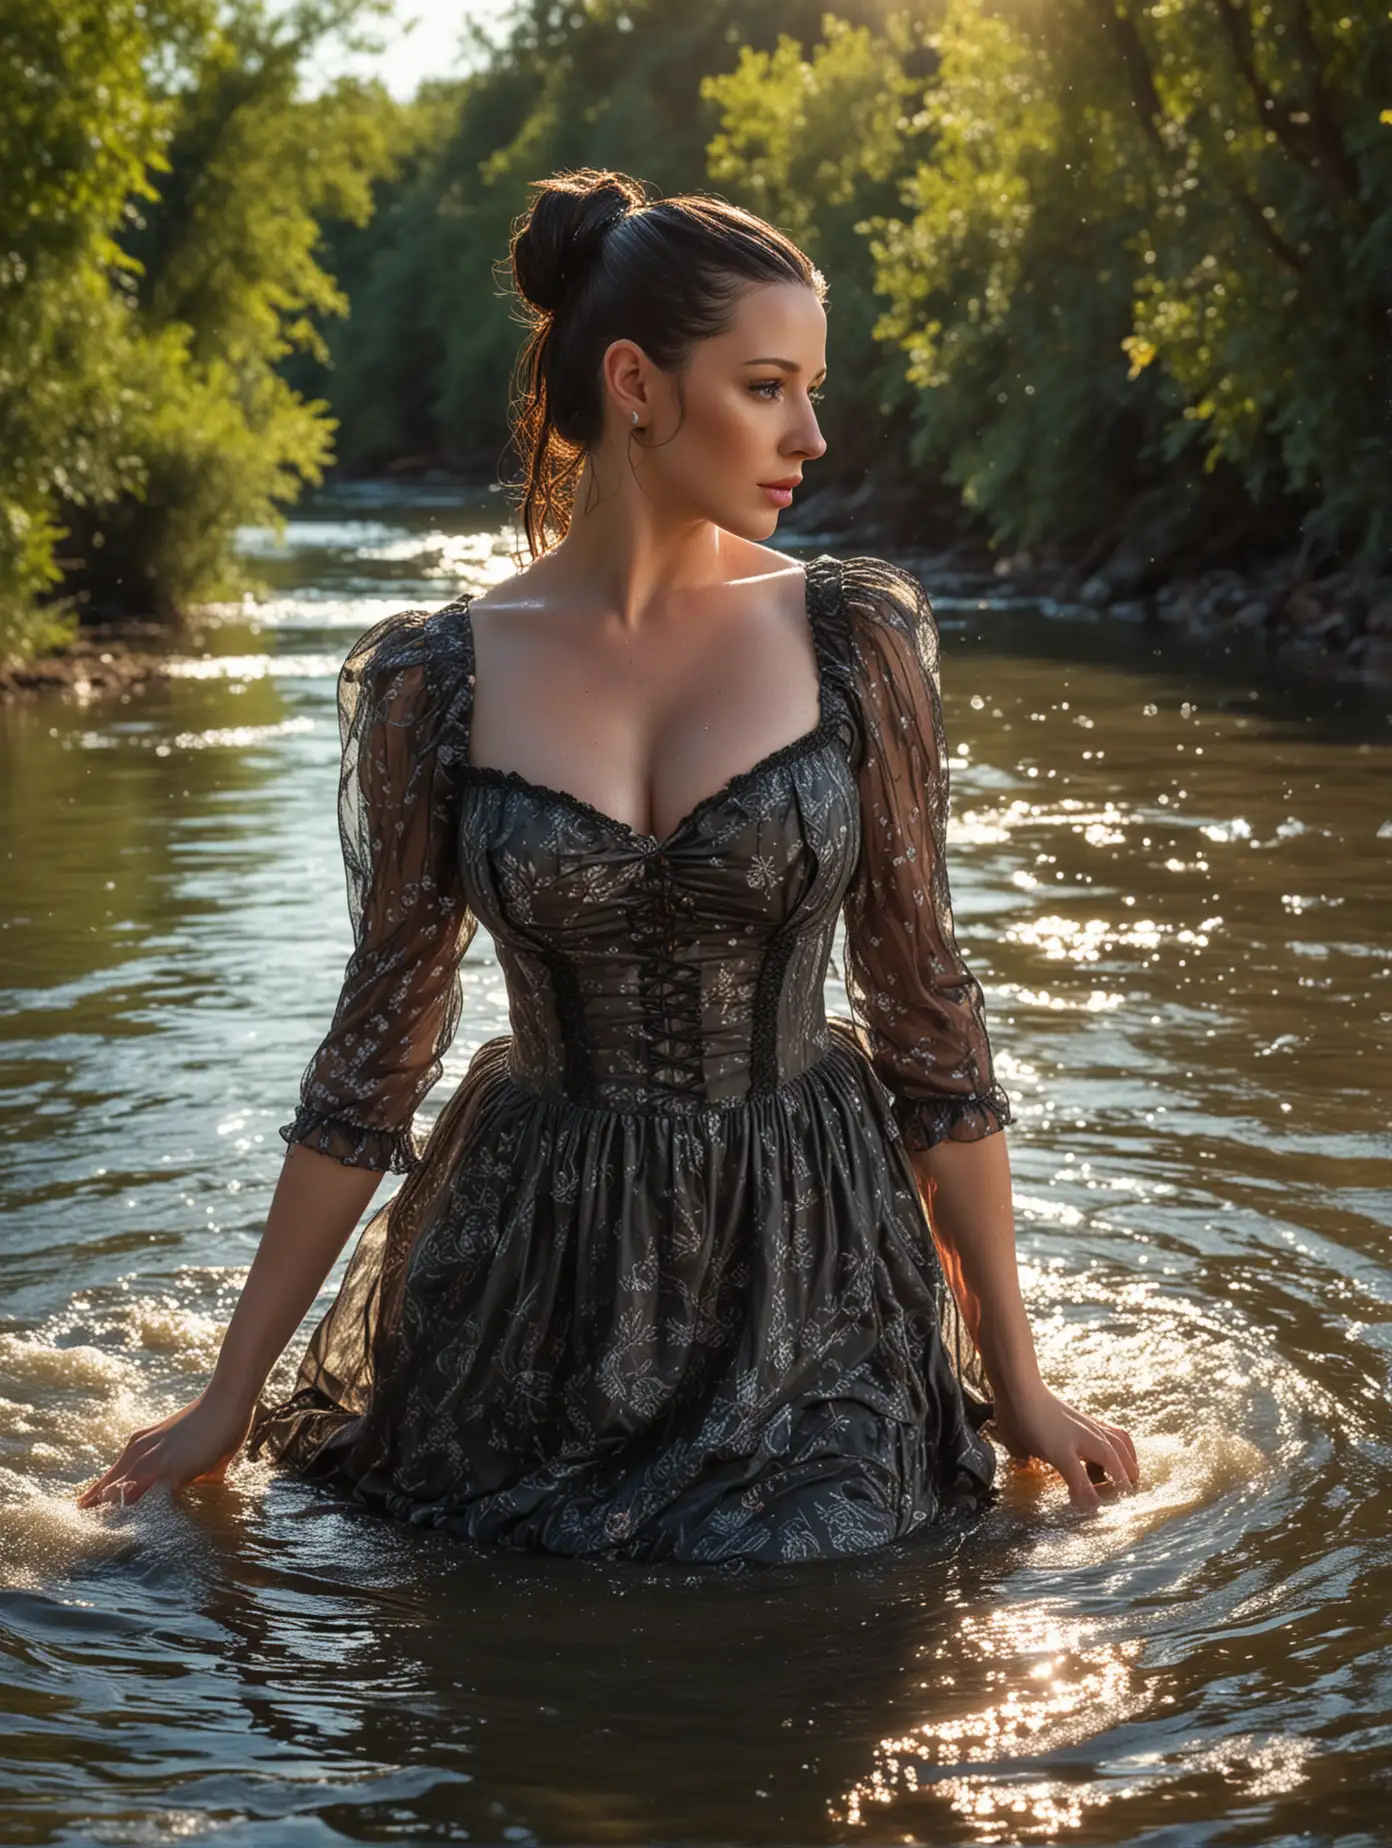 A stunningly beautiful Angela White with ponytail hair style, she was bathing in river, surrounded by a captivating river water. She wears Victorian mini dress, accentuating her elegance. her hair and dress was wet look. The scene takes place under a bright raytracing of sunshine, with a fantasy background that showcases a blend of neon ambiance and abstract black oil. The composition is high contrasting, with a touch of grunge and intricate complexity.